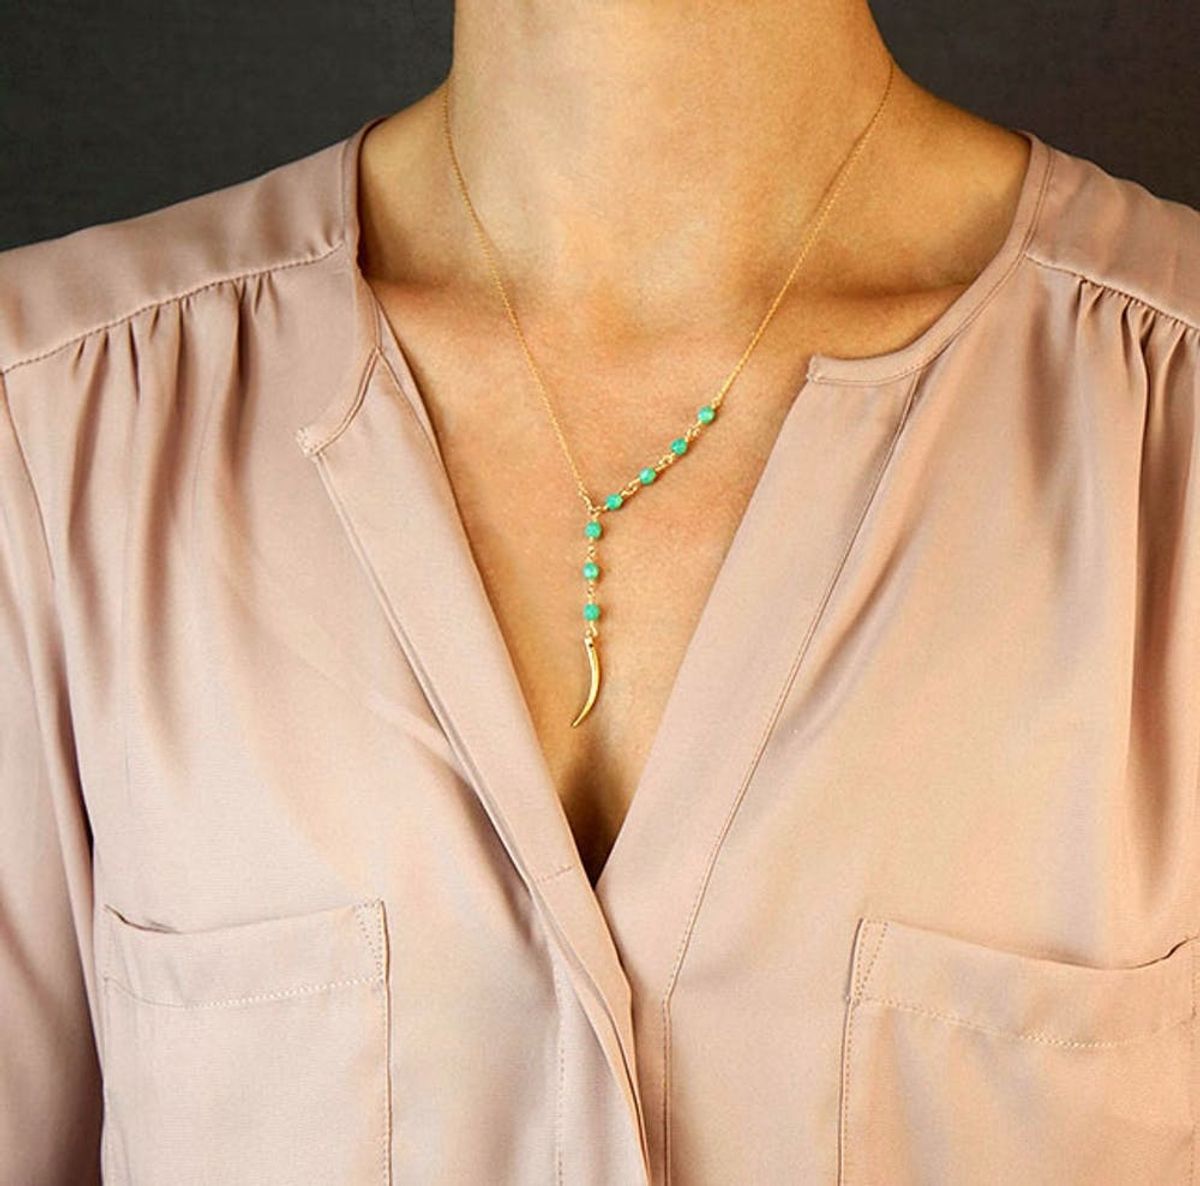 13 Delicate Necklaces to Wear With Everything